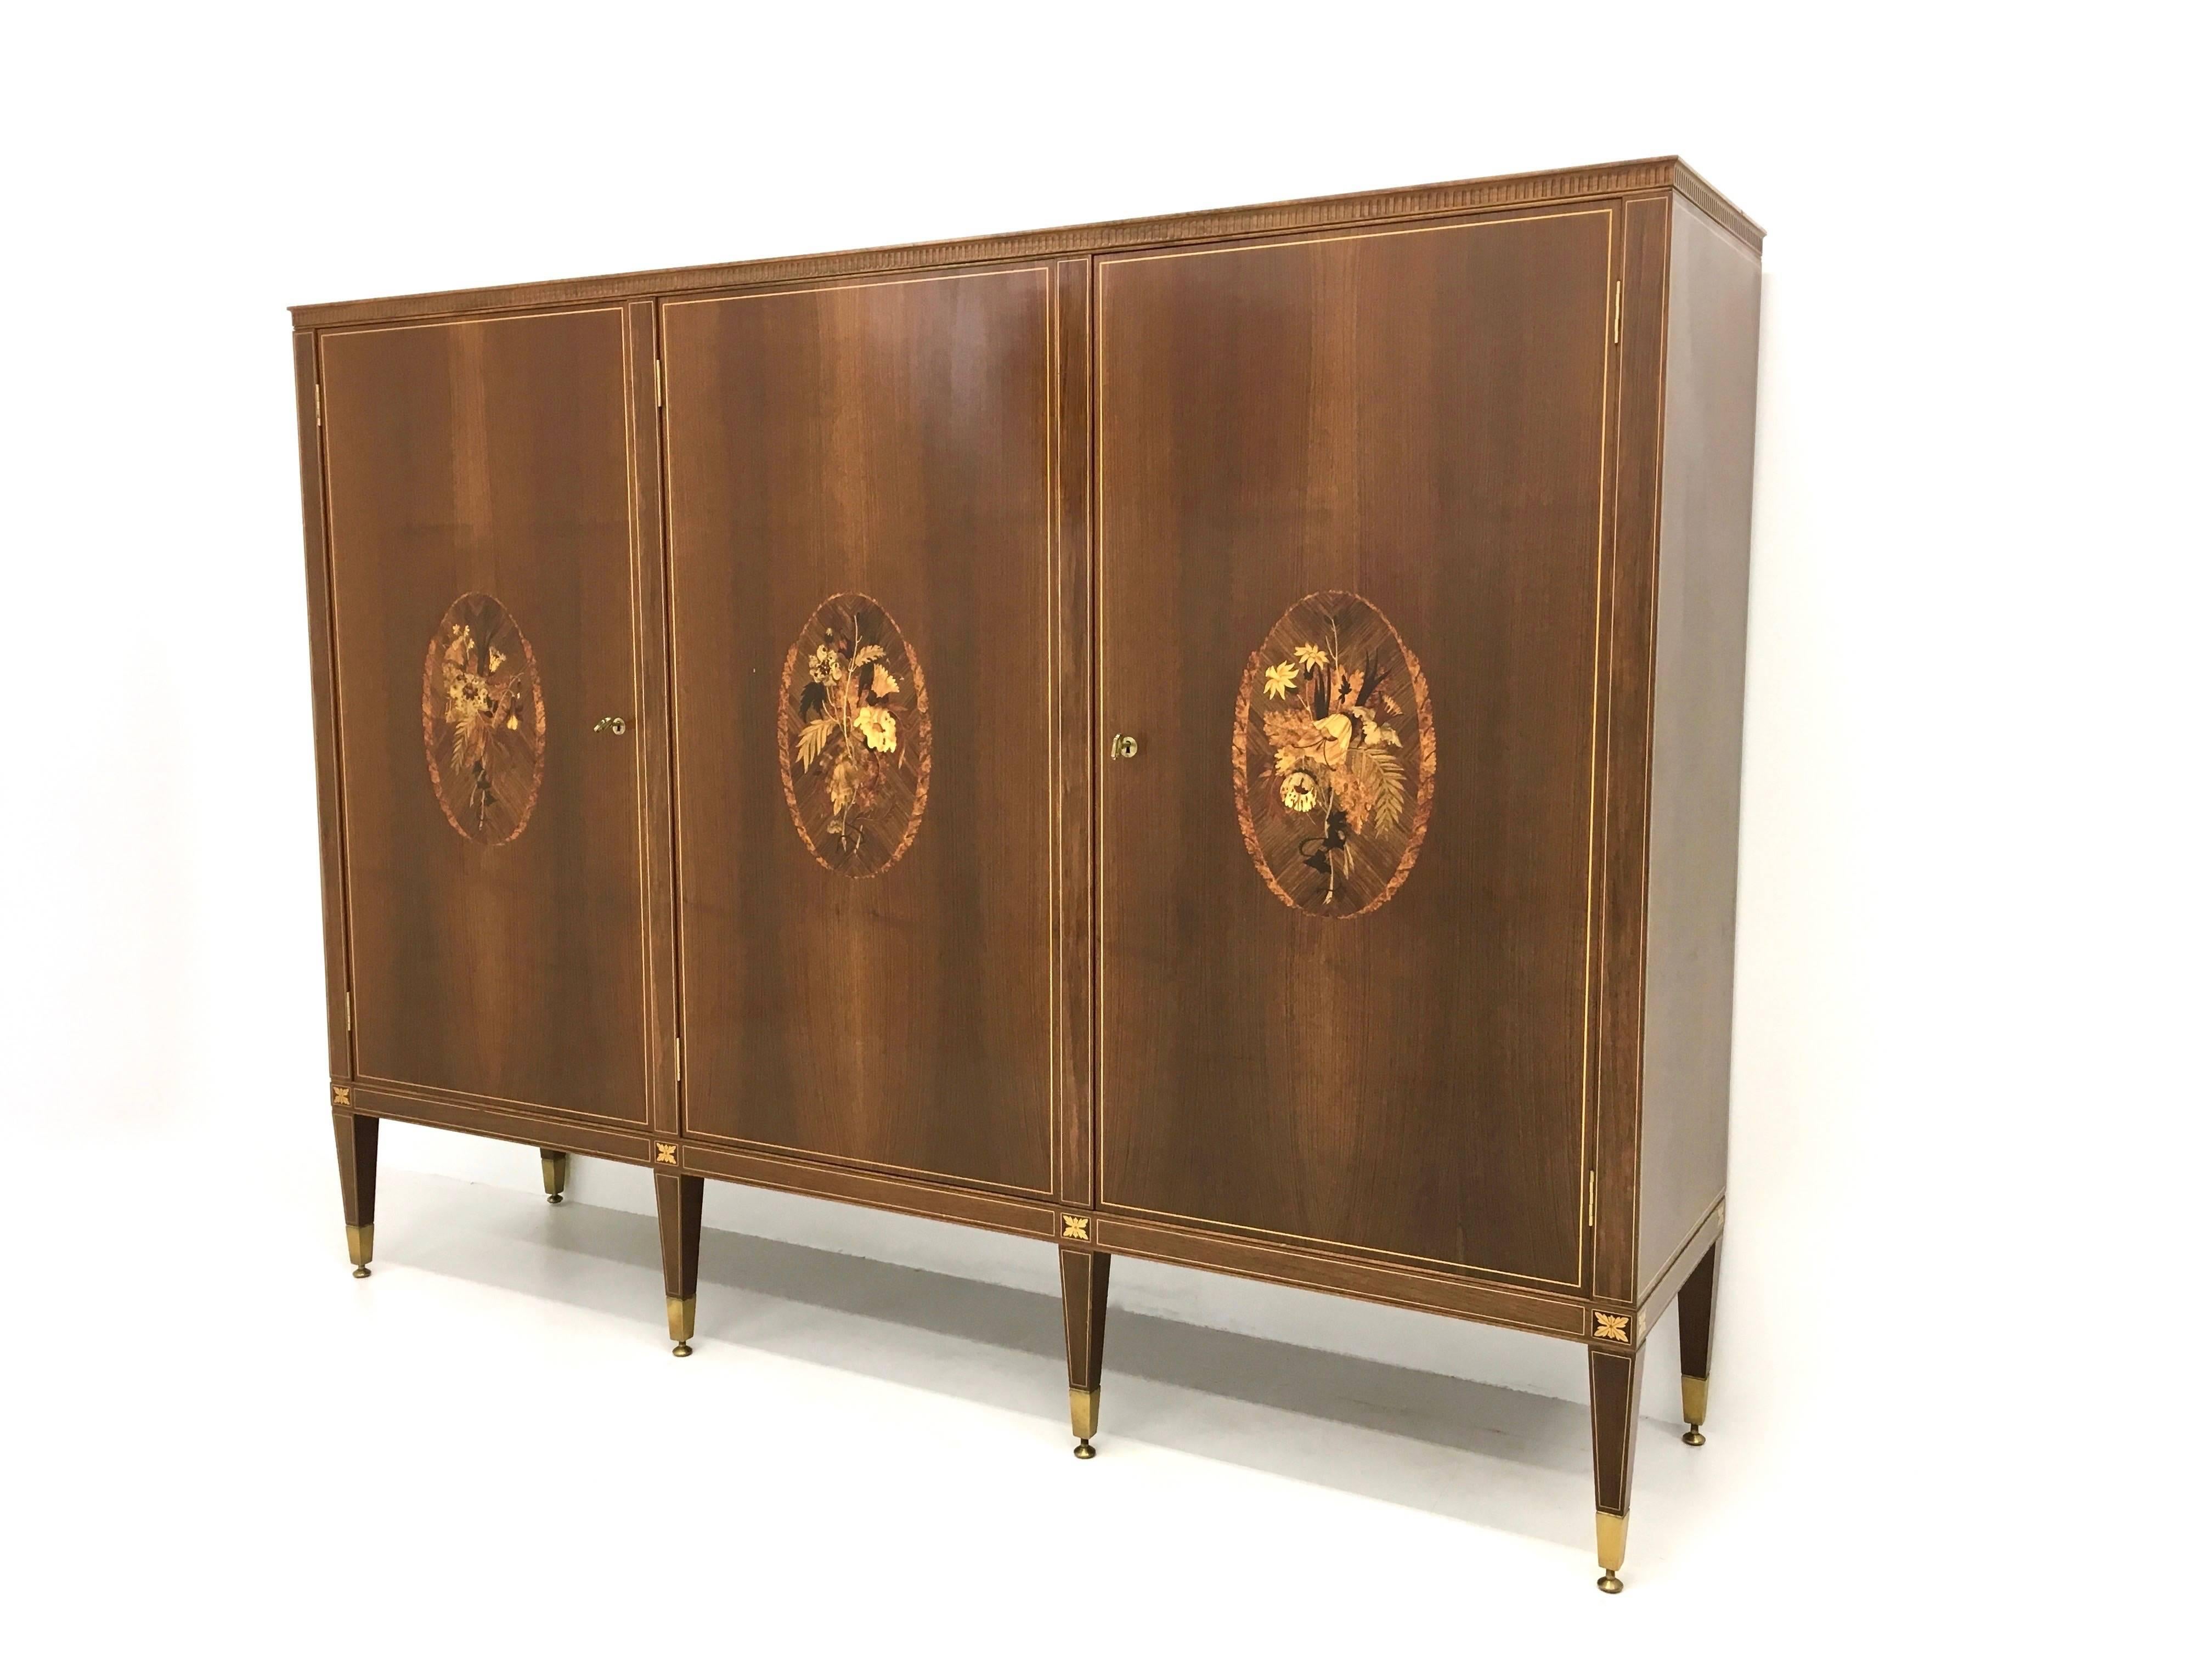 Made in Italy, 1950s.
This is a high quality manufactured piece, that is made from wood, wood veneer with boxwood threads, inlaid signed by Anzani, brass finishing, crystal shelves and internal lighting system.
The brass feet are adjustable.
It is